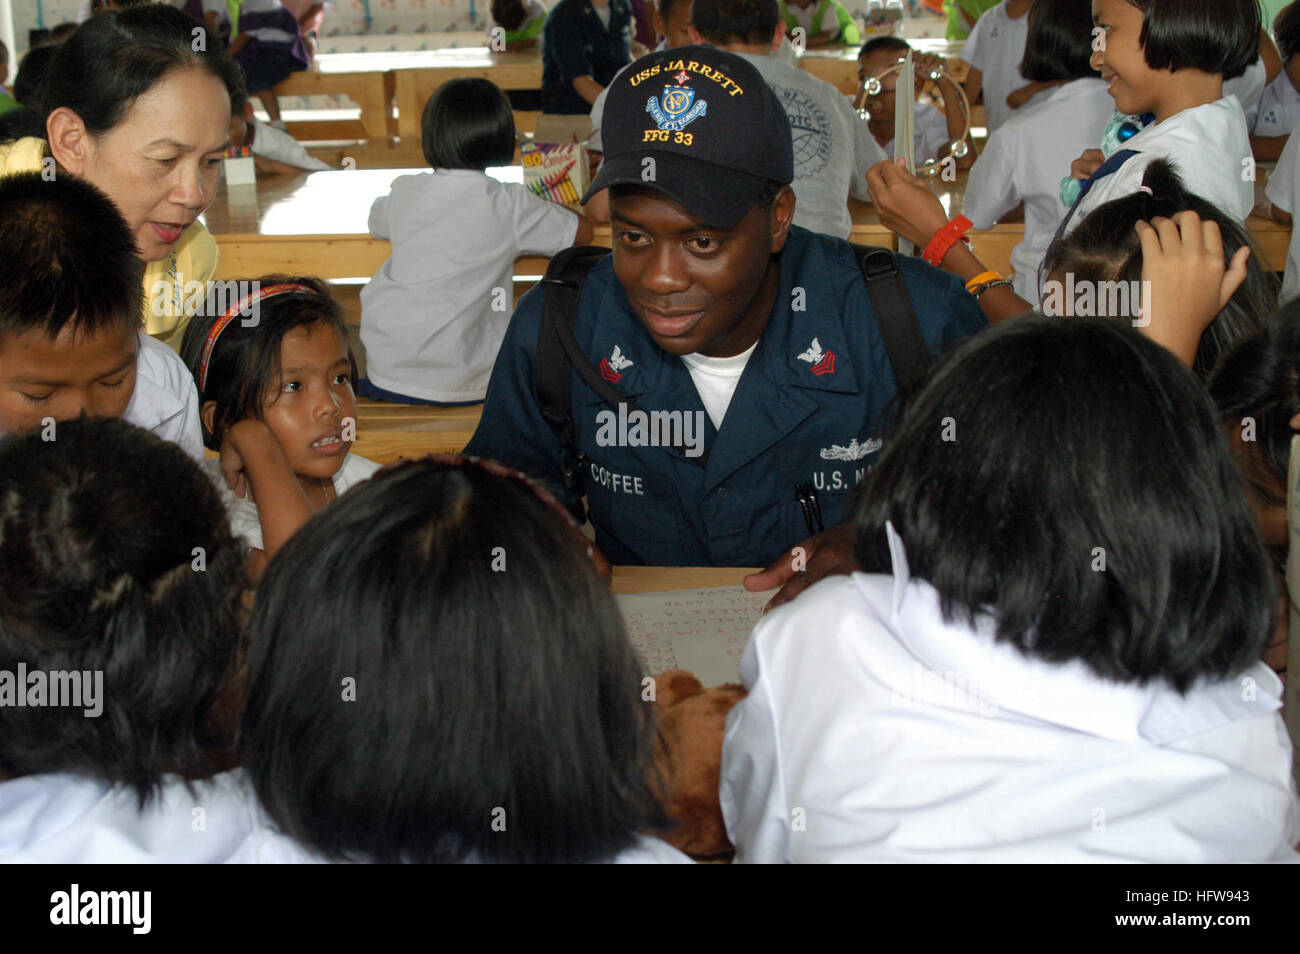 080616-N-3581D-241 SATTAHIP, Thailand (June 16, 2008) Yeoman 1st Class Andre L. Coffee, assigned to the frigate USS Jarrett (FFG 33) gets acquainted with students from Ban Kao Chan Primary School. Jarrett is one of several U.S. Navy ships participating in Cooperation Afloat Readiness and Training (CARAT) 2008. CARAT is an annual series of bilateral maritime exercises between the U.S. and Southeast Asia nations.  U.S. Navy photo by Mass Communication Specialist 1st Class Maurice Dayao (Released) US Navy 080616-N-3581D-241 Yeoman 1st Class Andre L. Coffee, assigned to the frigate USS Jarrett (FF Stock Photo